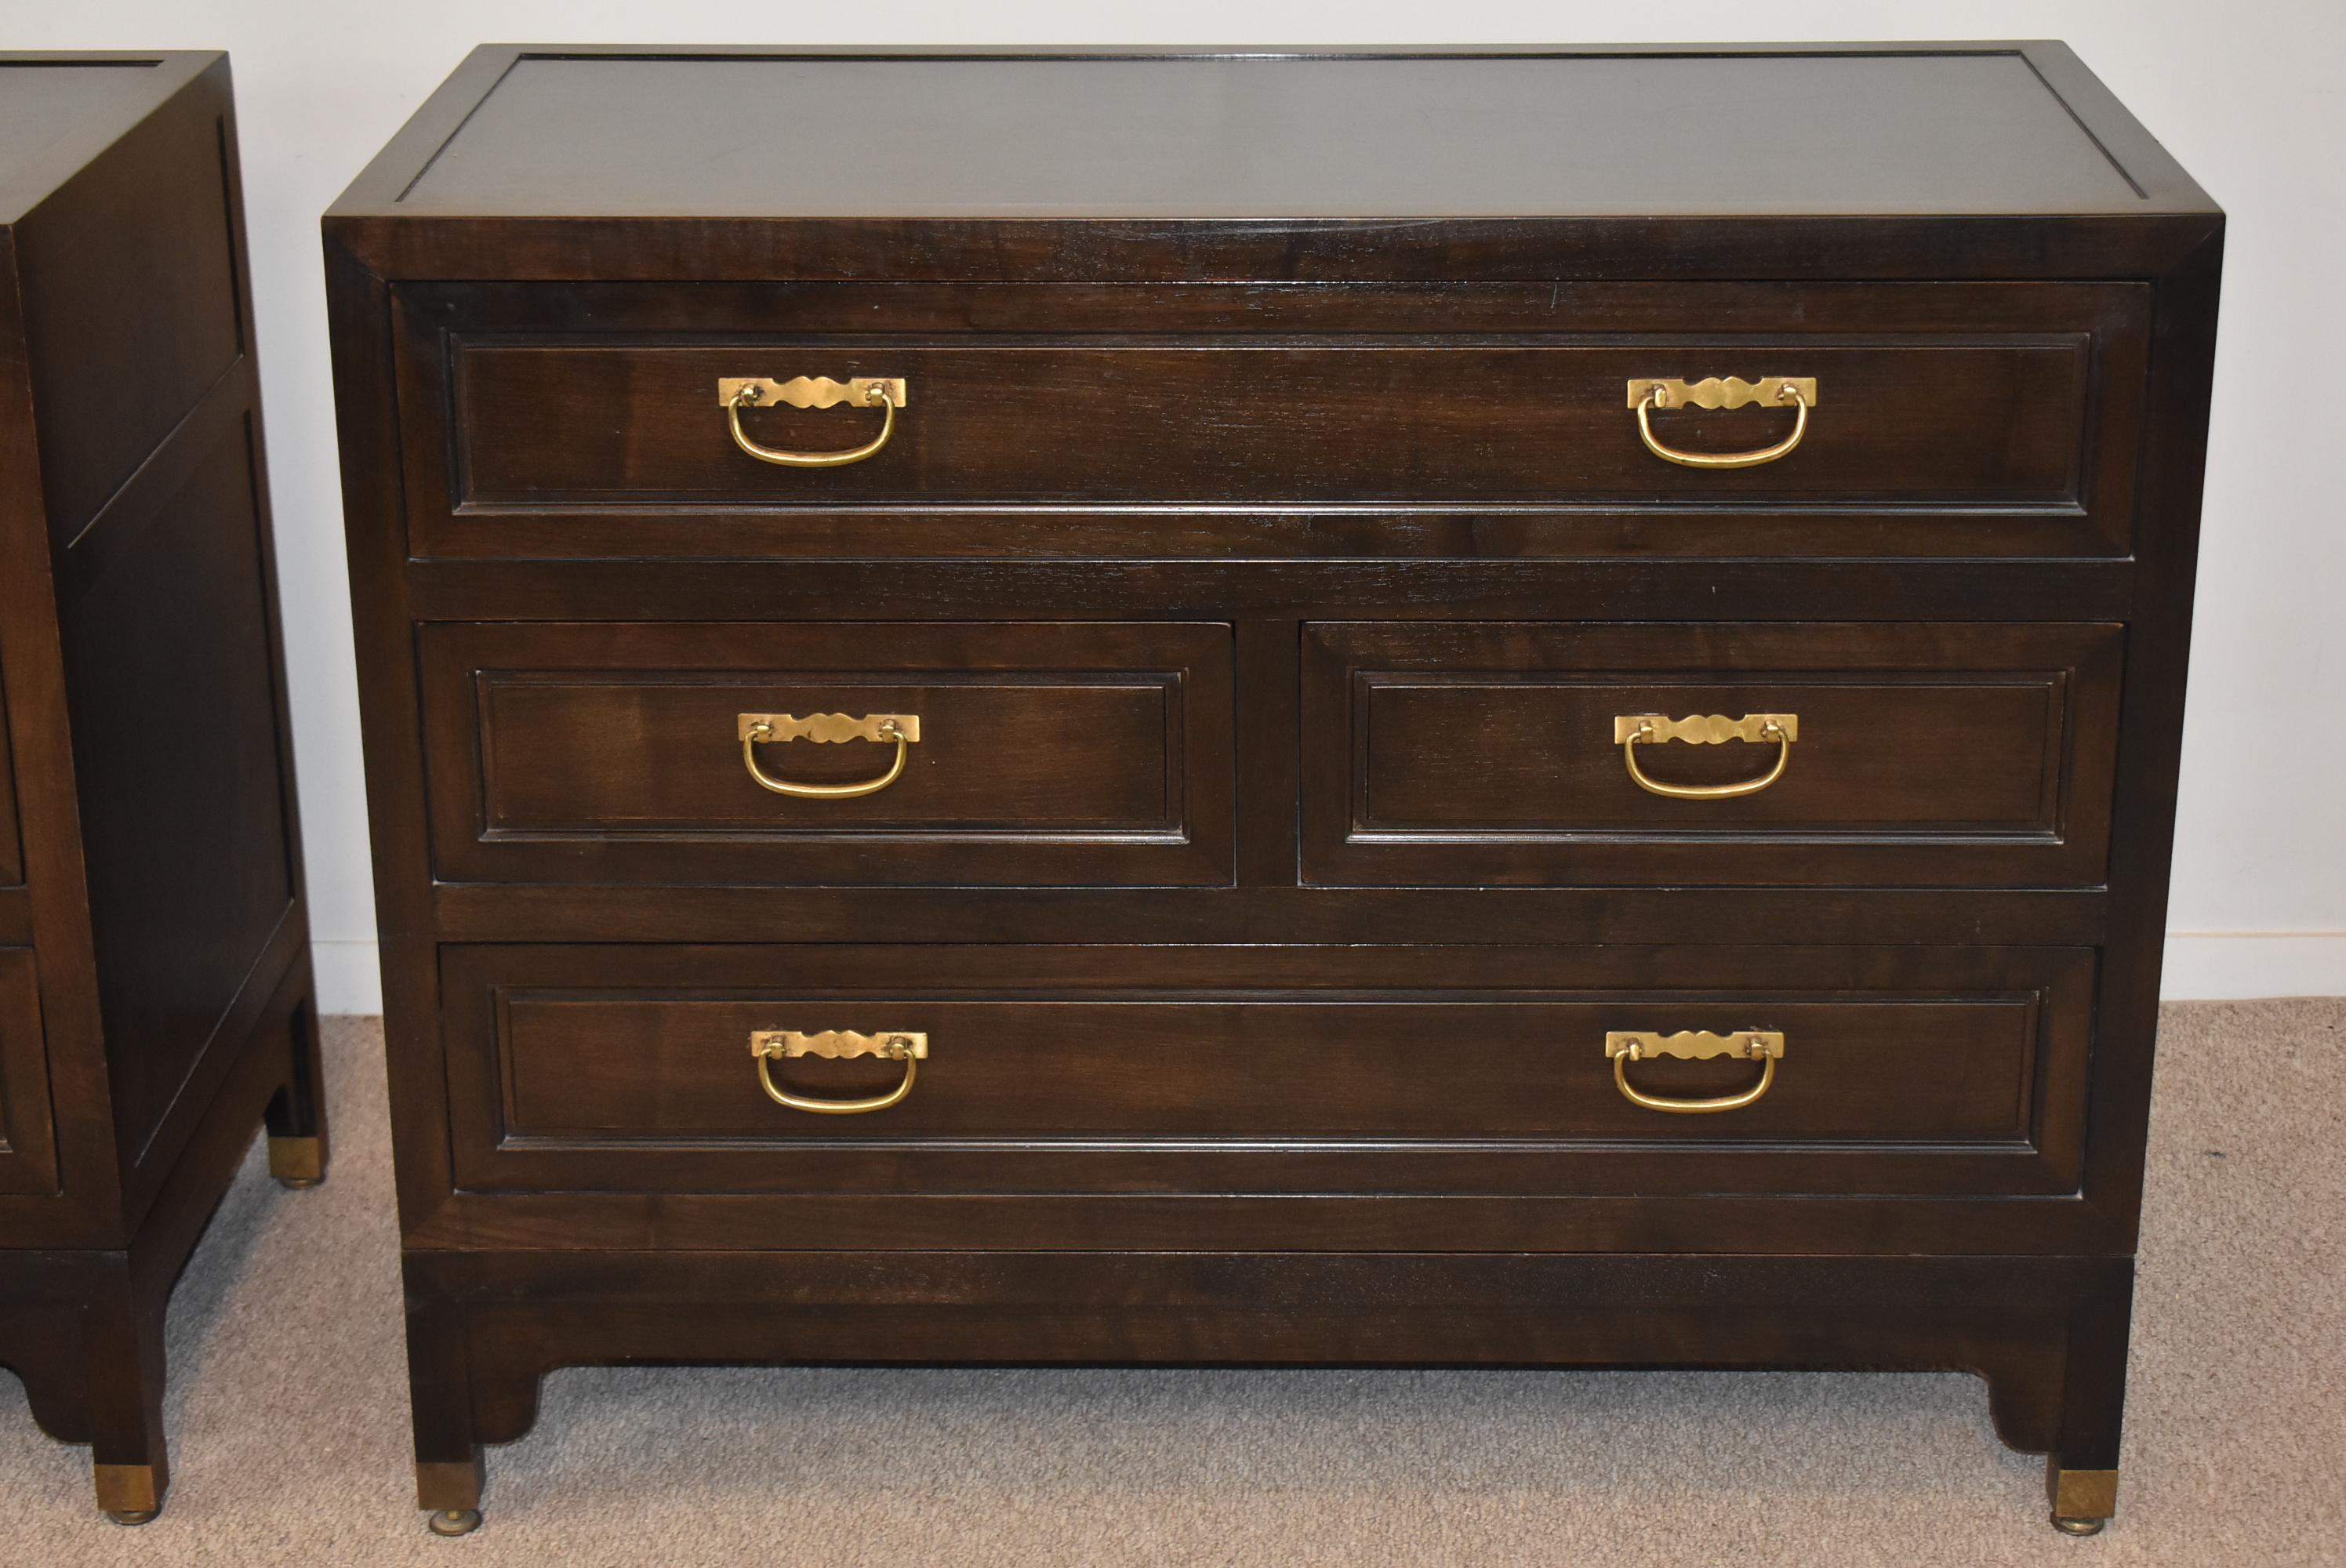 Pair of chest by Michael Taylor for Baker. This pair is from the Baker Far East Collection, with an ebonized oak finish. These pieces each have four drawers, the drawer units come off the bracketed base. Drawers have brass pulls. Excellent vintage